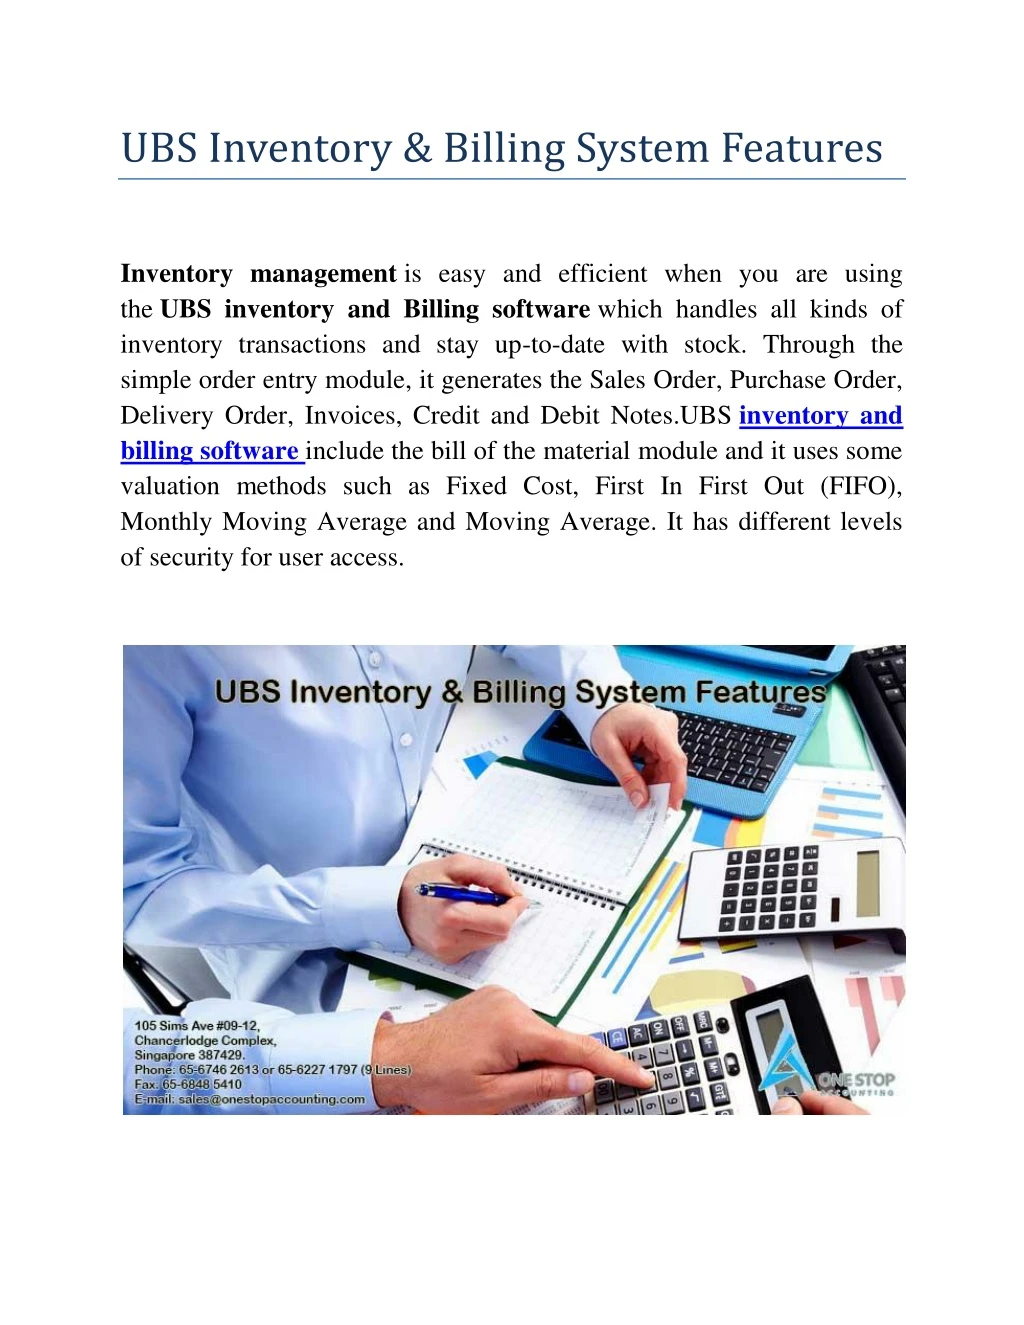 ubs inventory billing system features